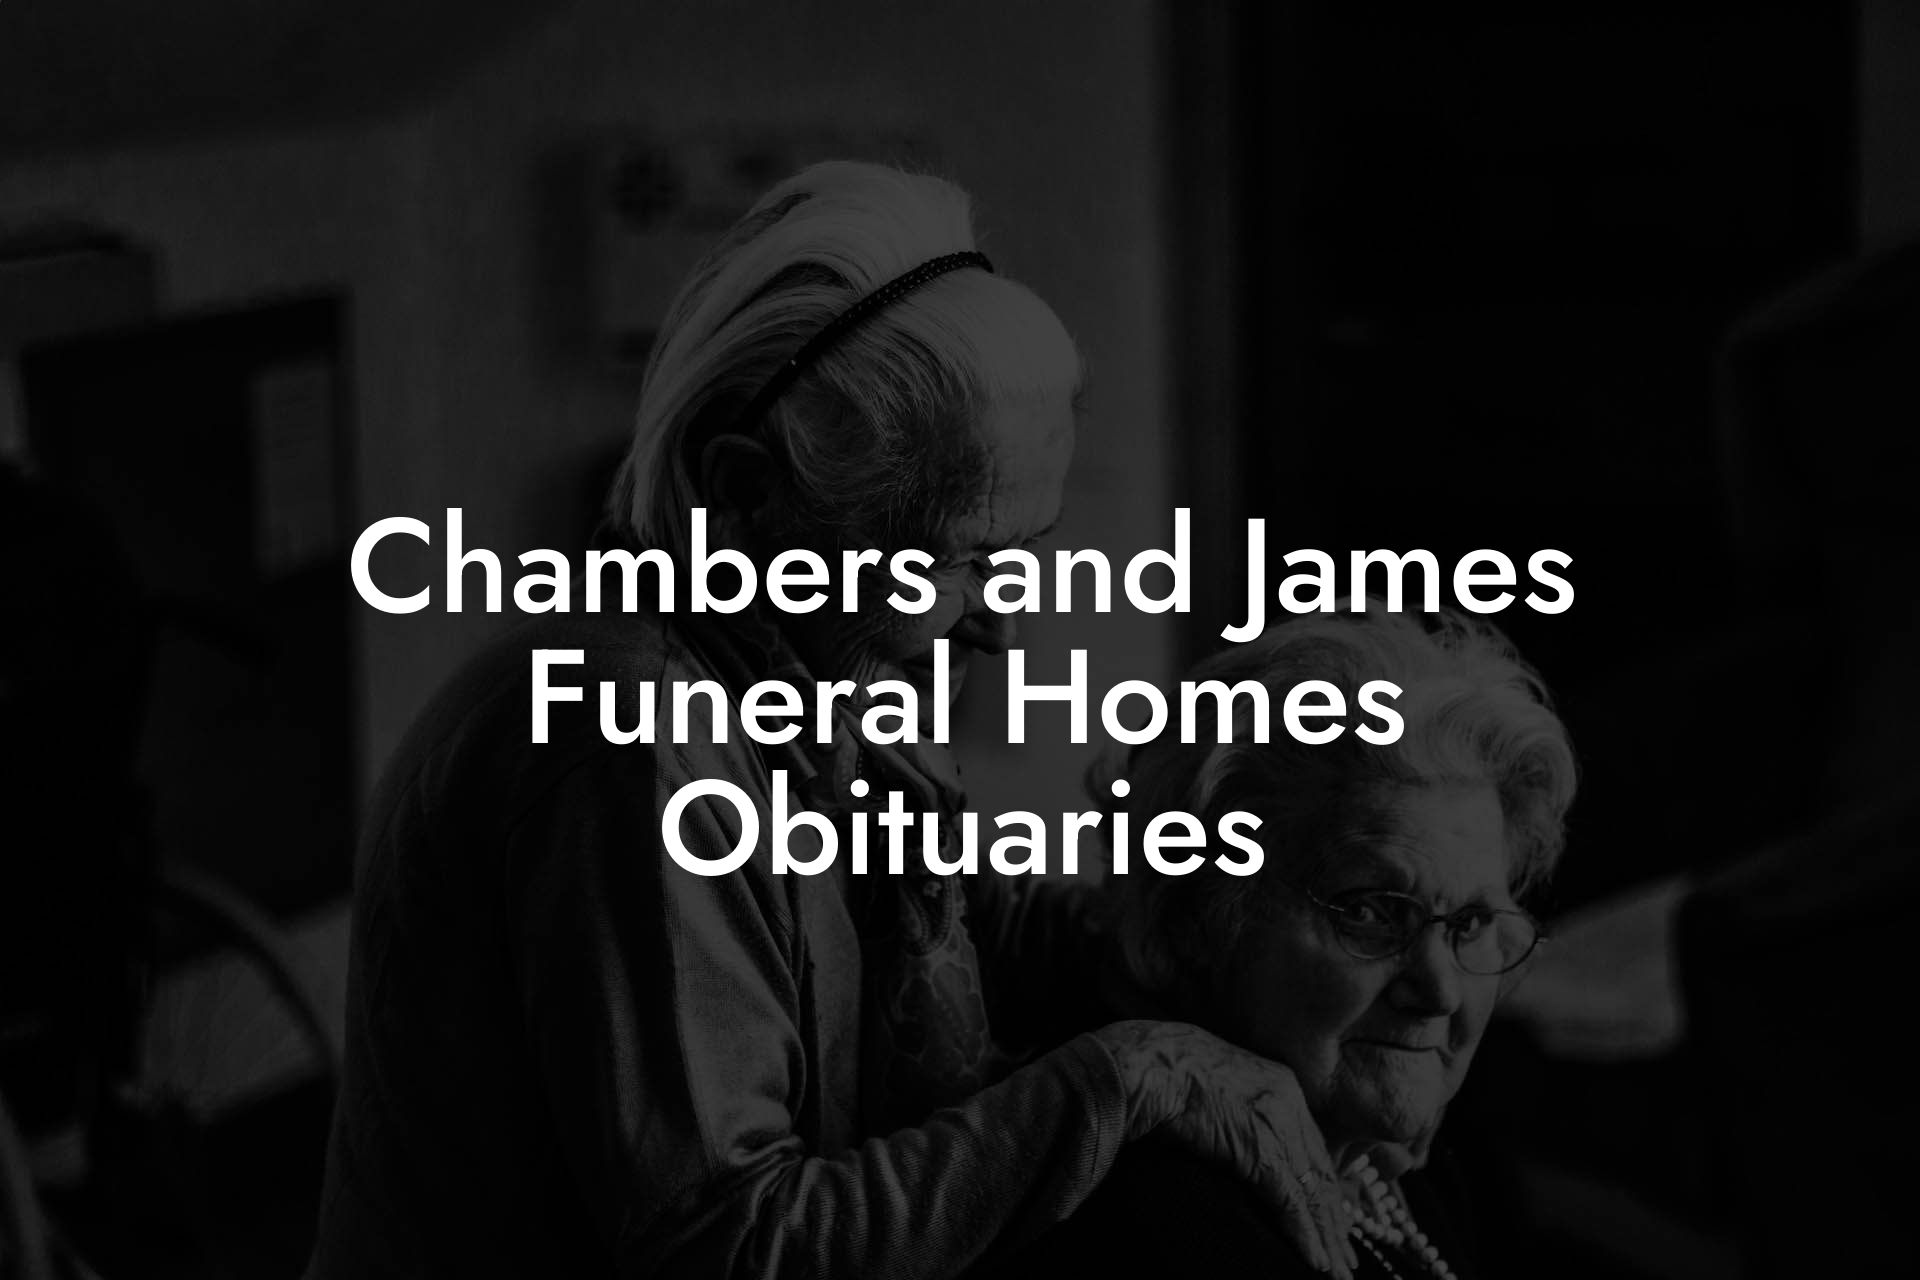 Chambers and James Funeral Homes Obituaries